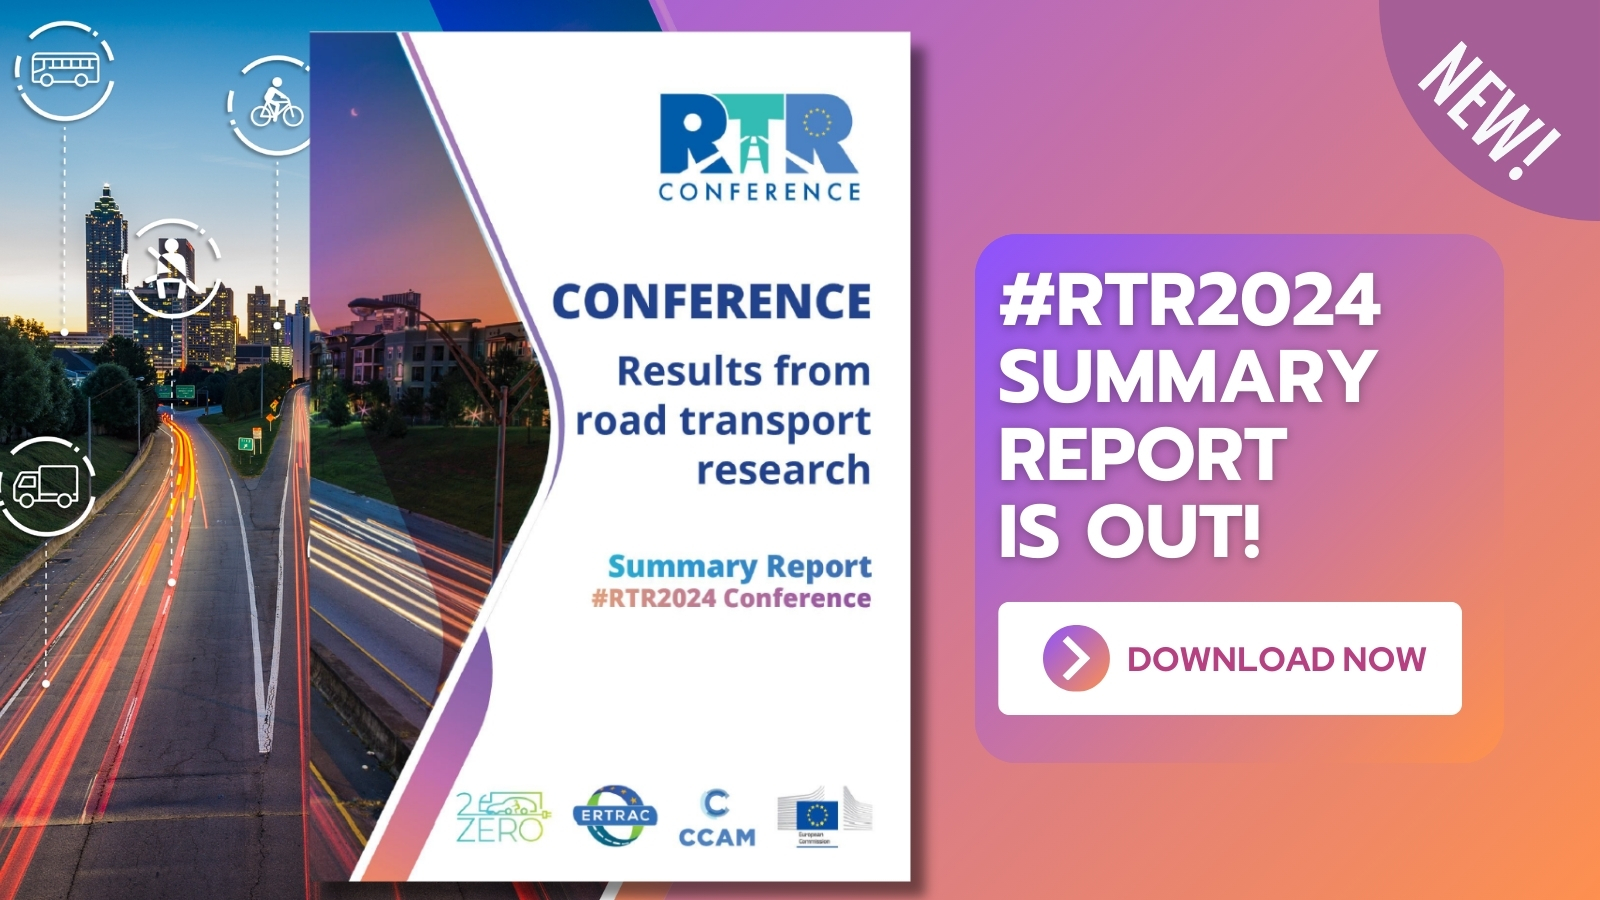 Journey through innovation: exploring the highlights of the #RTR2024 Road Transport Research Summary!